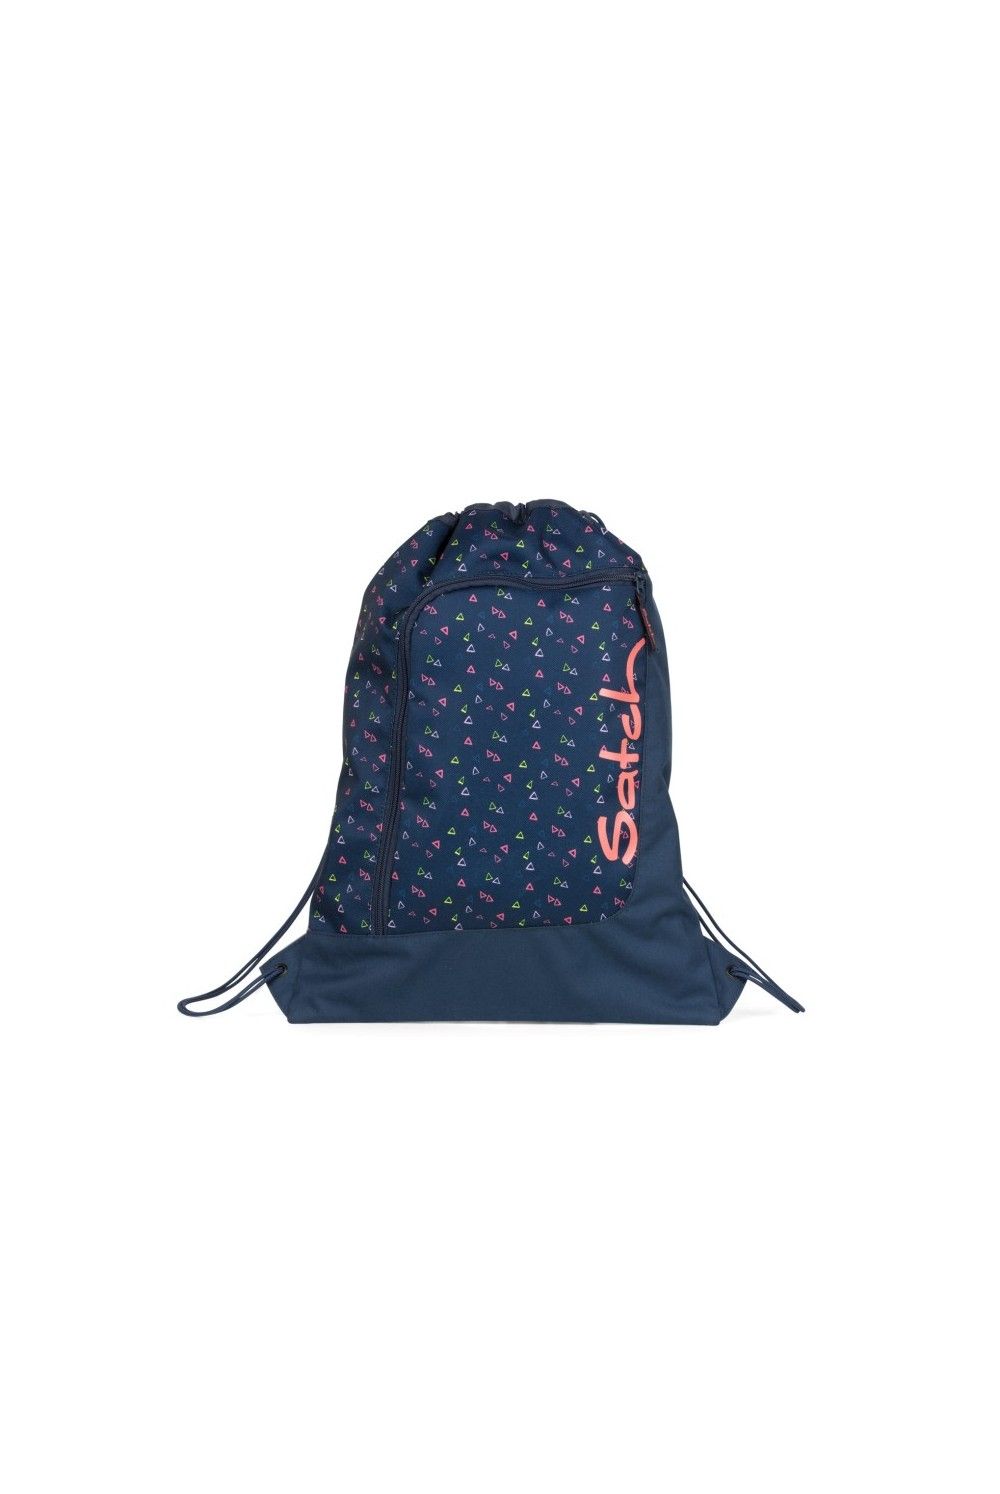 Satch sports bag Funky Friday 74140